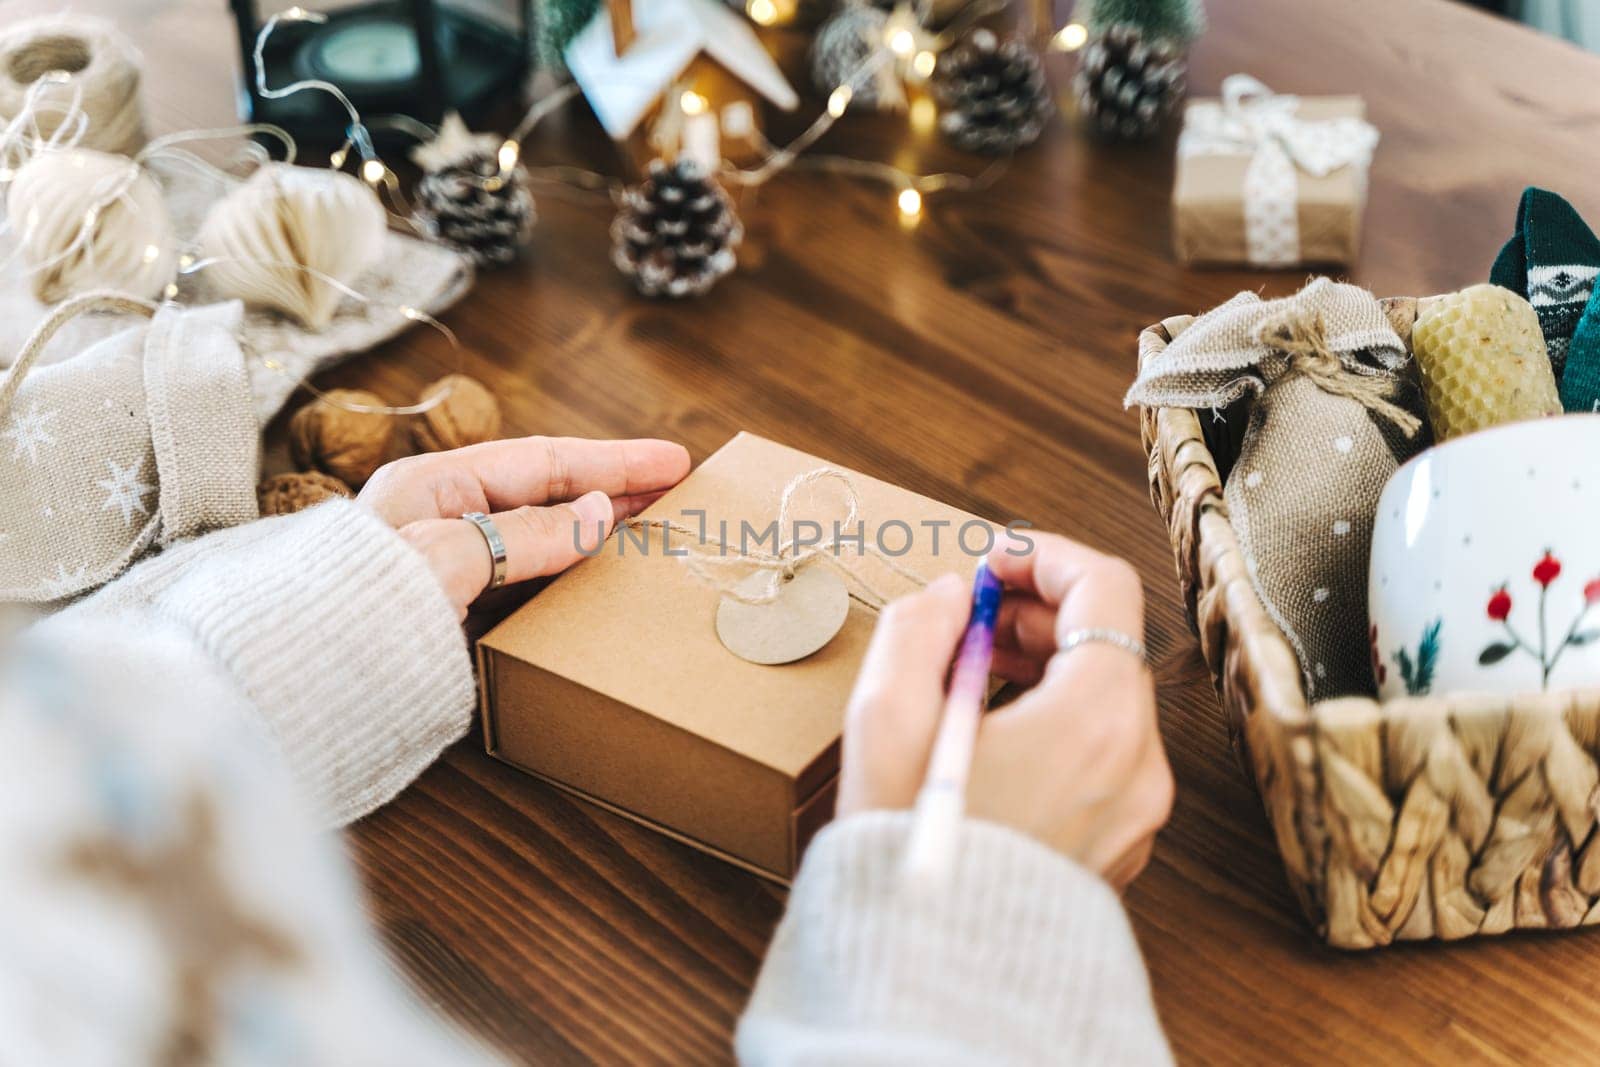 Woman s hands wrapping Christmas gift boxes, close up. Unprepared presents on white table with decor elements and items Christmas or New year DIY packing Concept by Ostanina